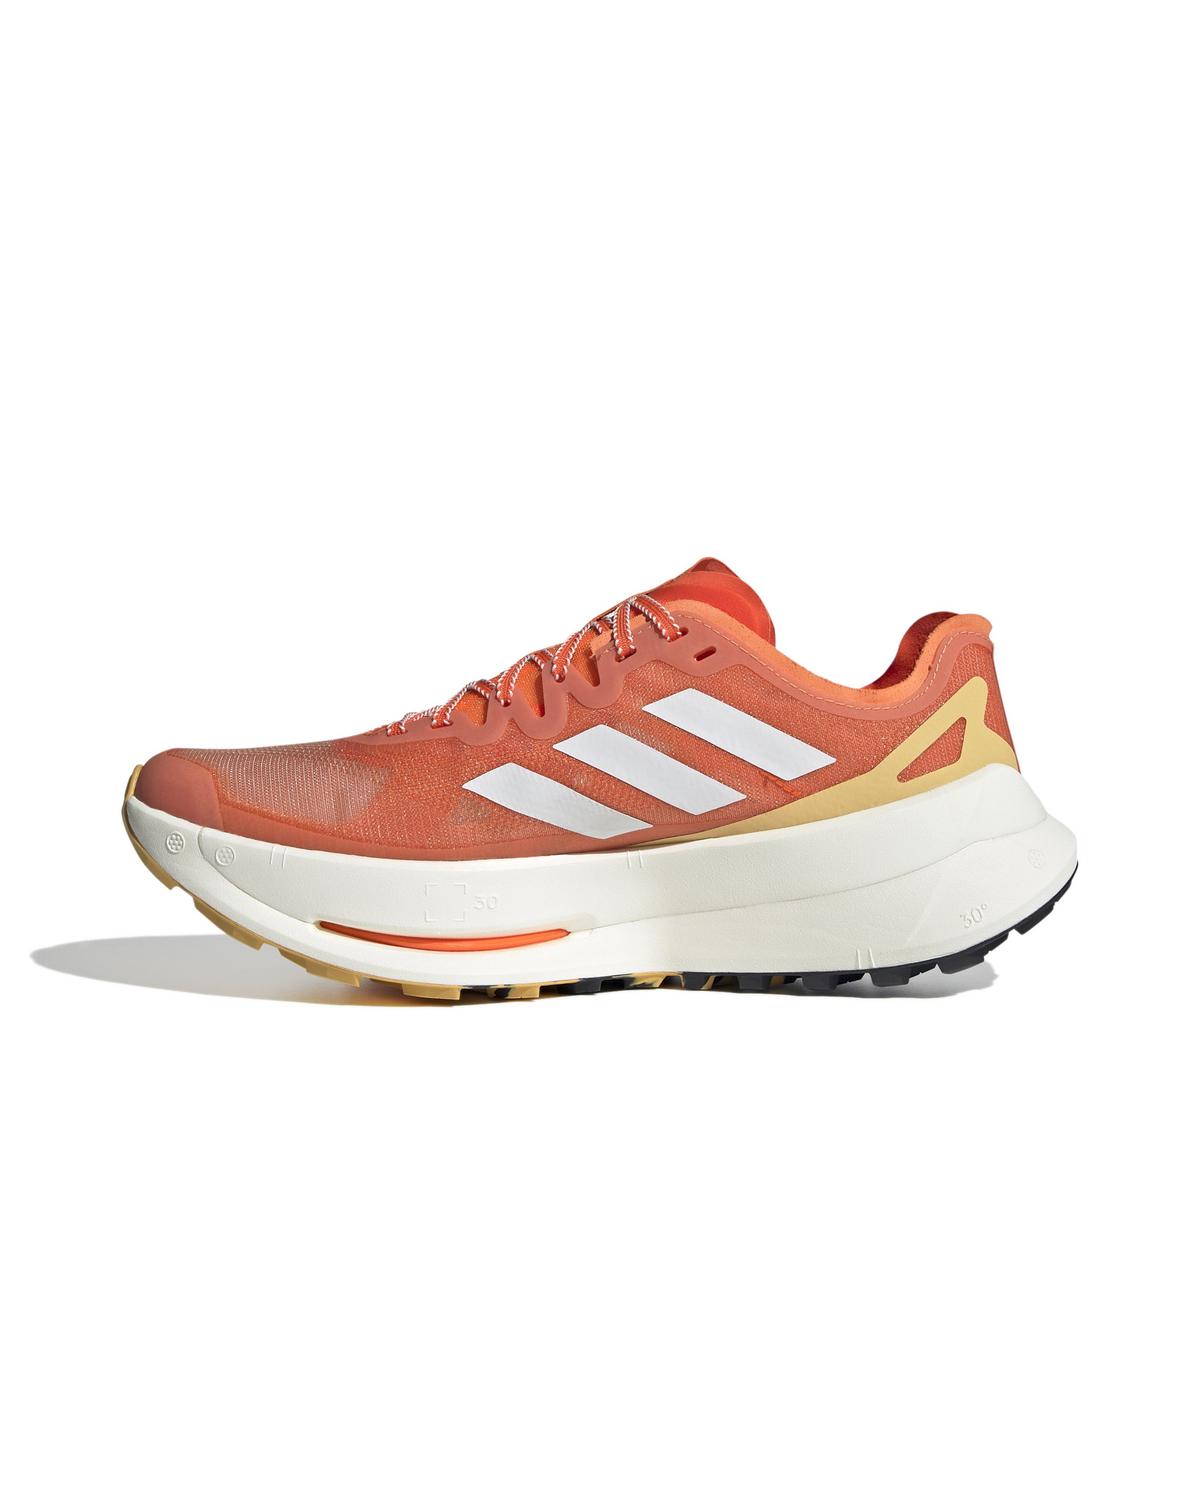 Adidas Men’s Terrex Agravic Speed Ultra Trail Running Shoes -  Coral